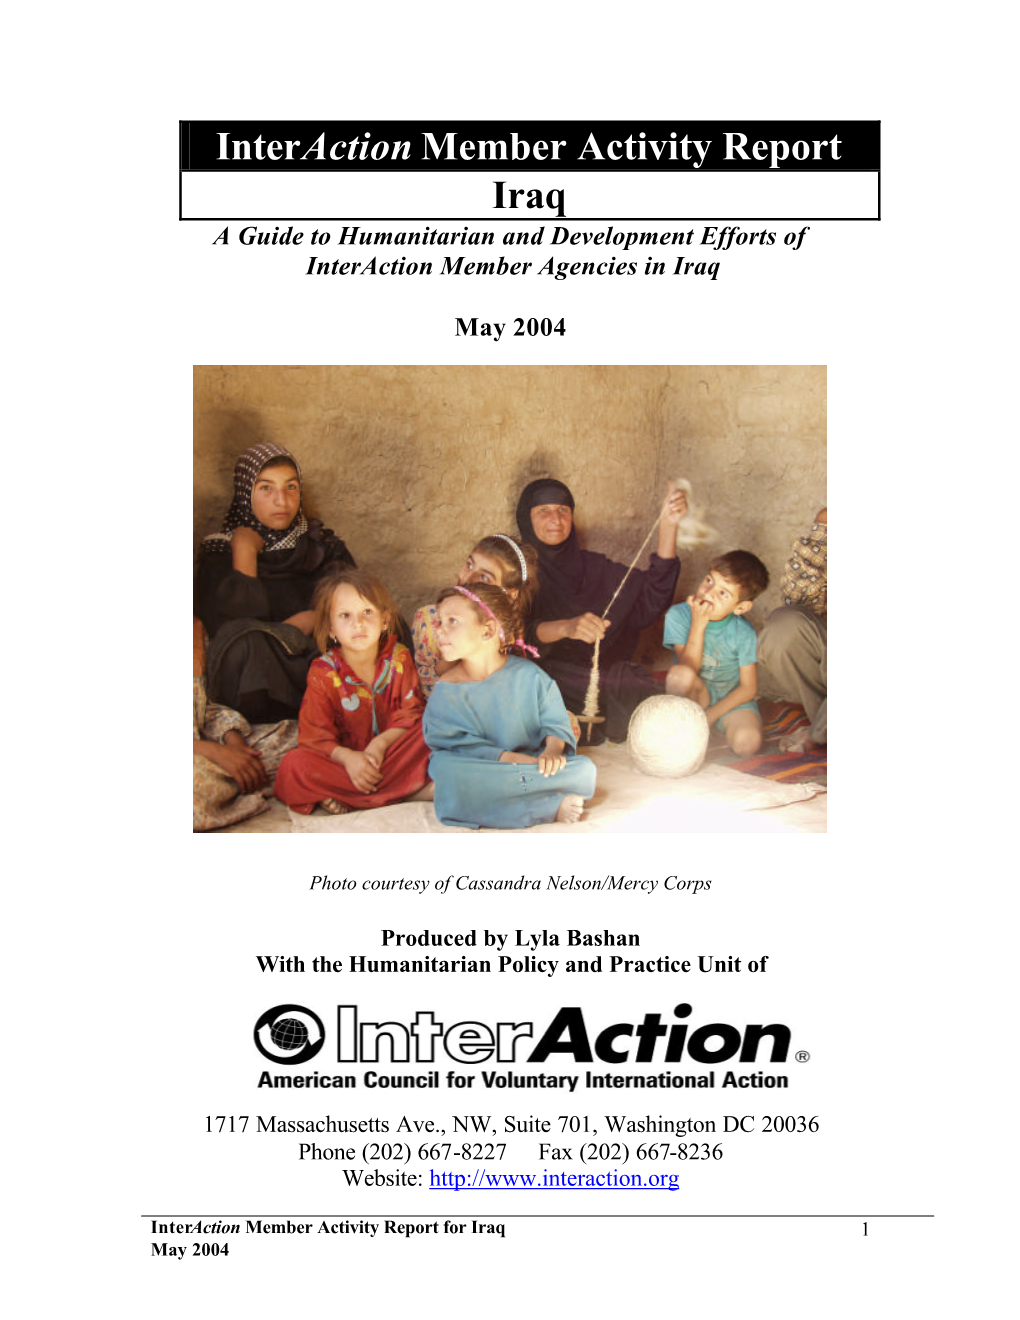 Interaction Member Activity Report Iraq a Guide to Humanitarian and Development Efforts of Interaction Member Agencies in Iraq